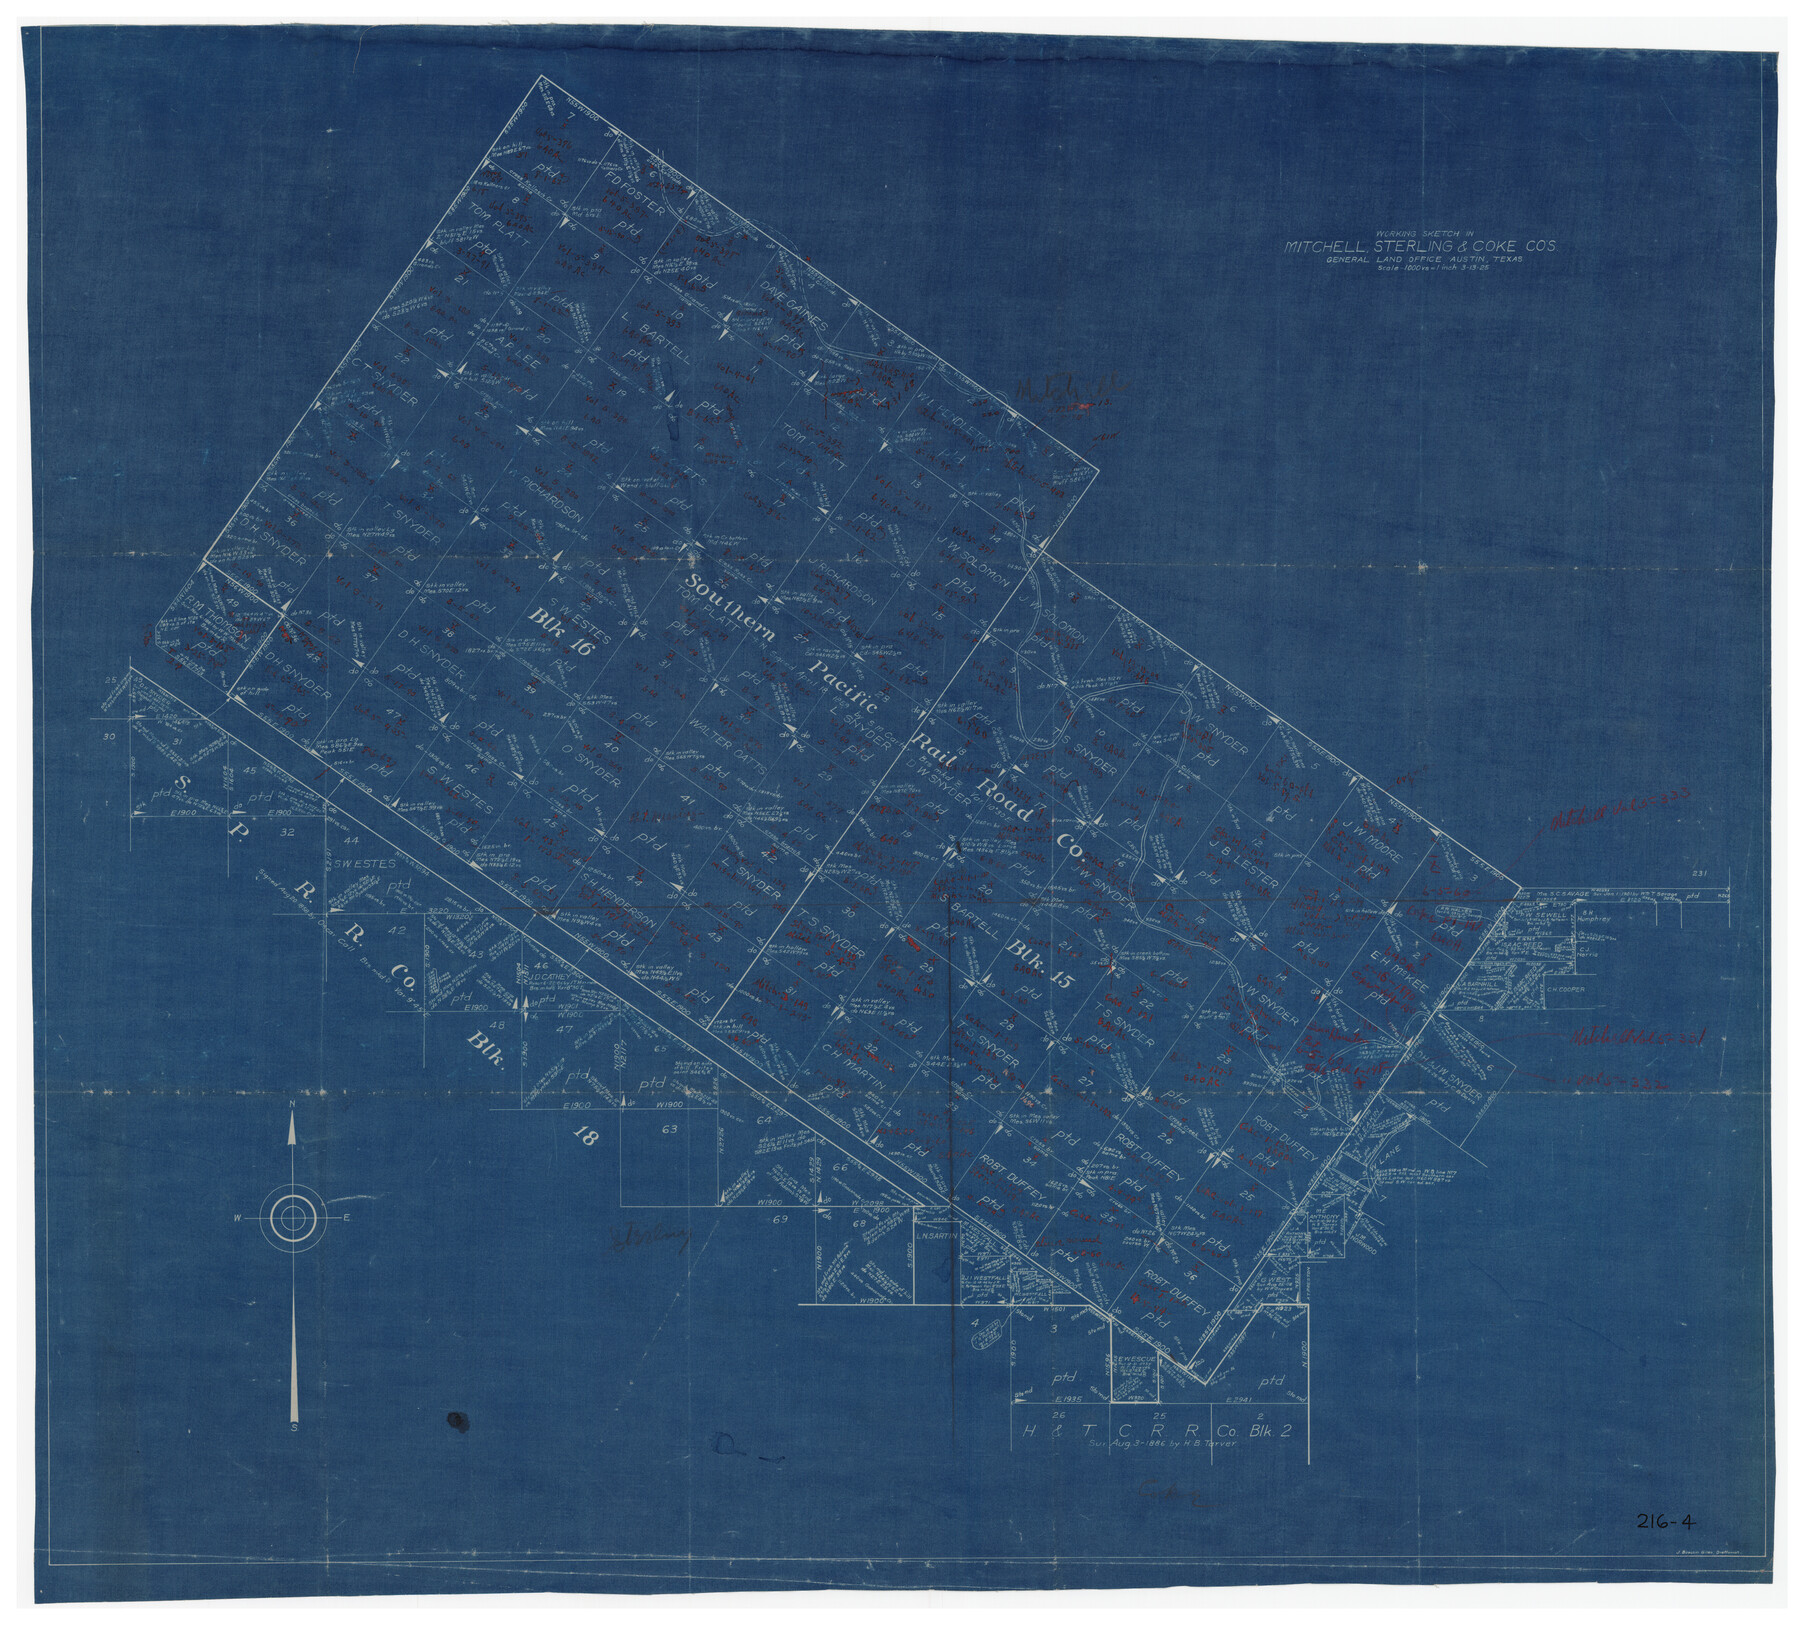 91840, Working Sketch in Mitchell, Sterling, and Coke Co's., Twichell Survey Records